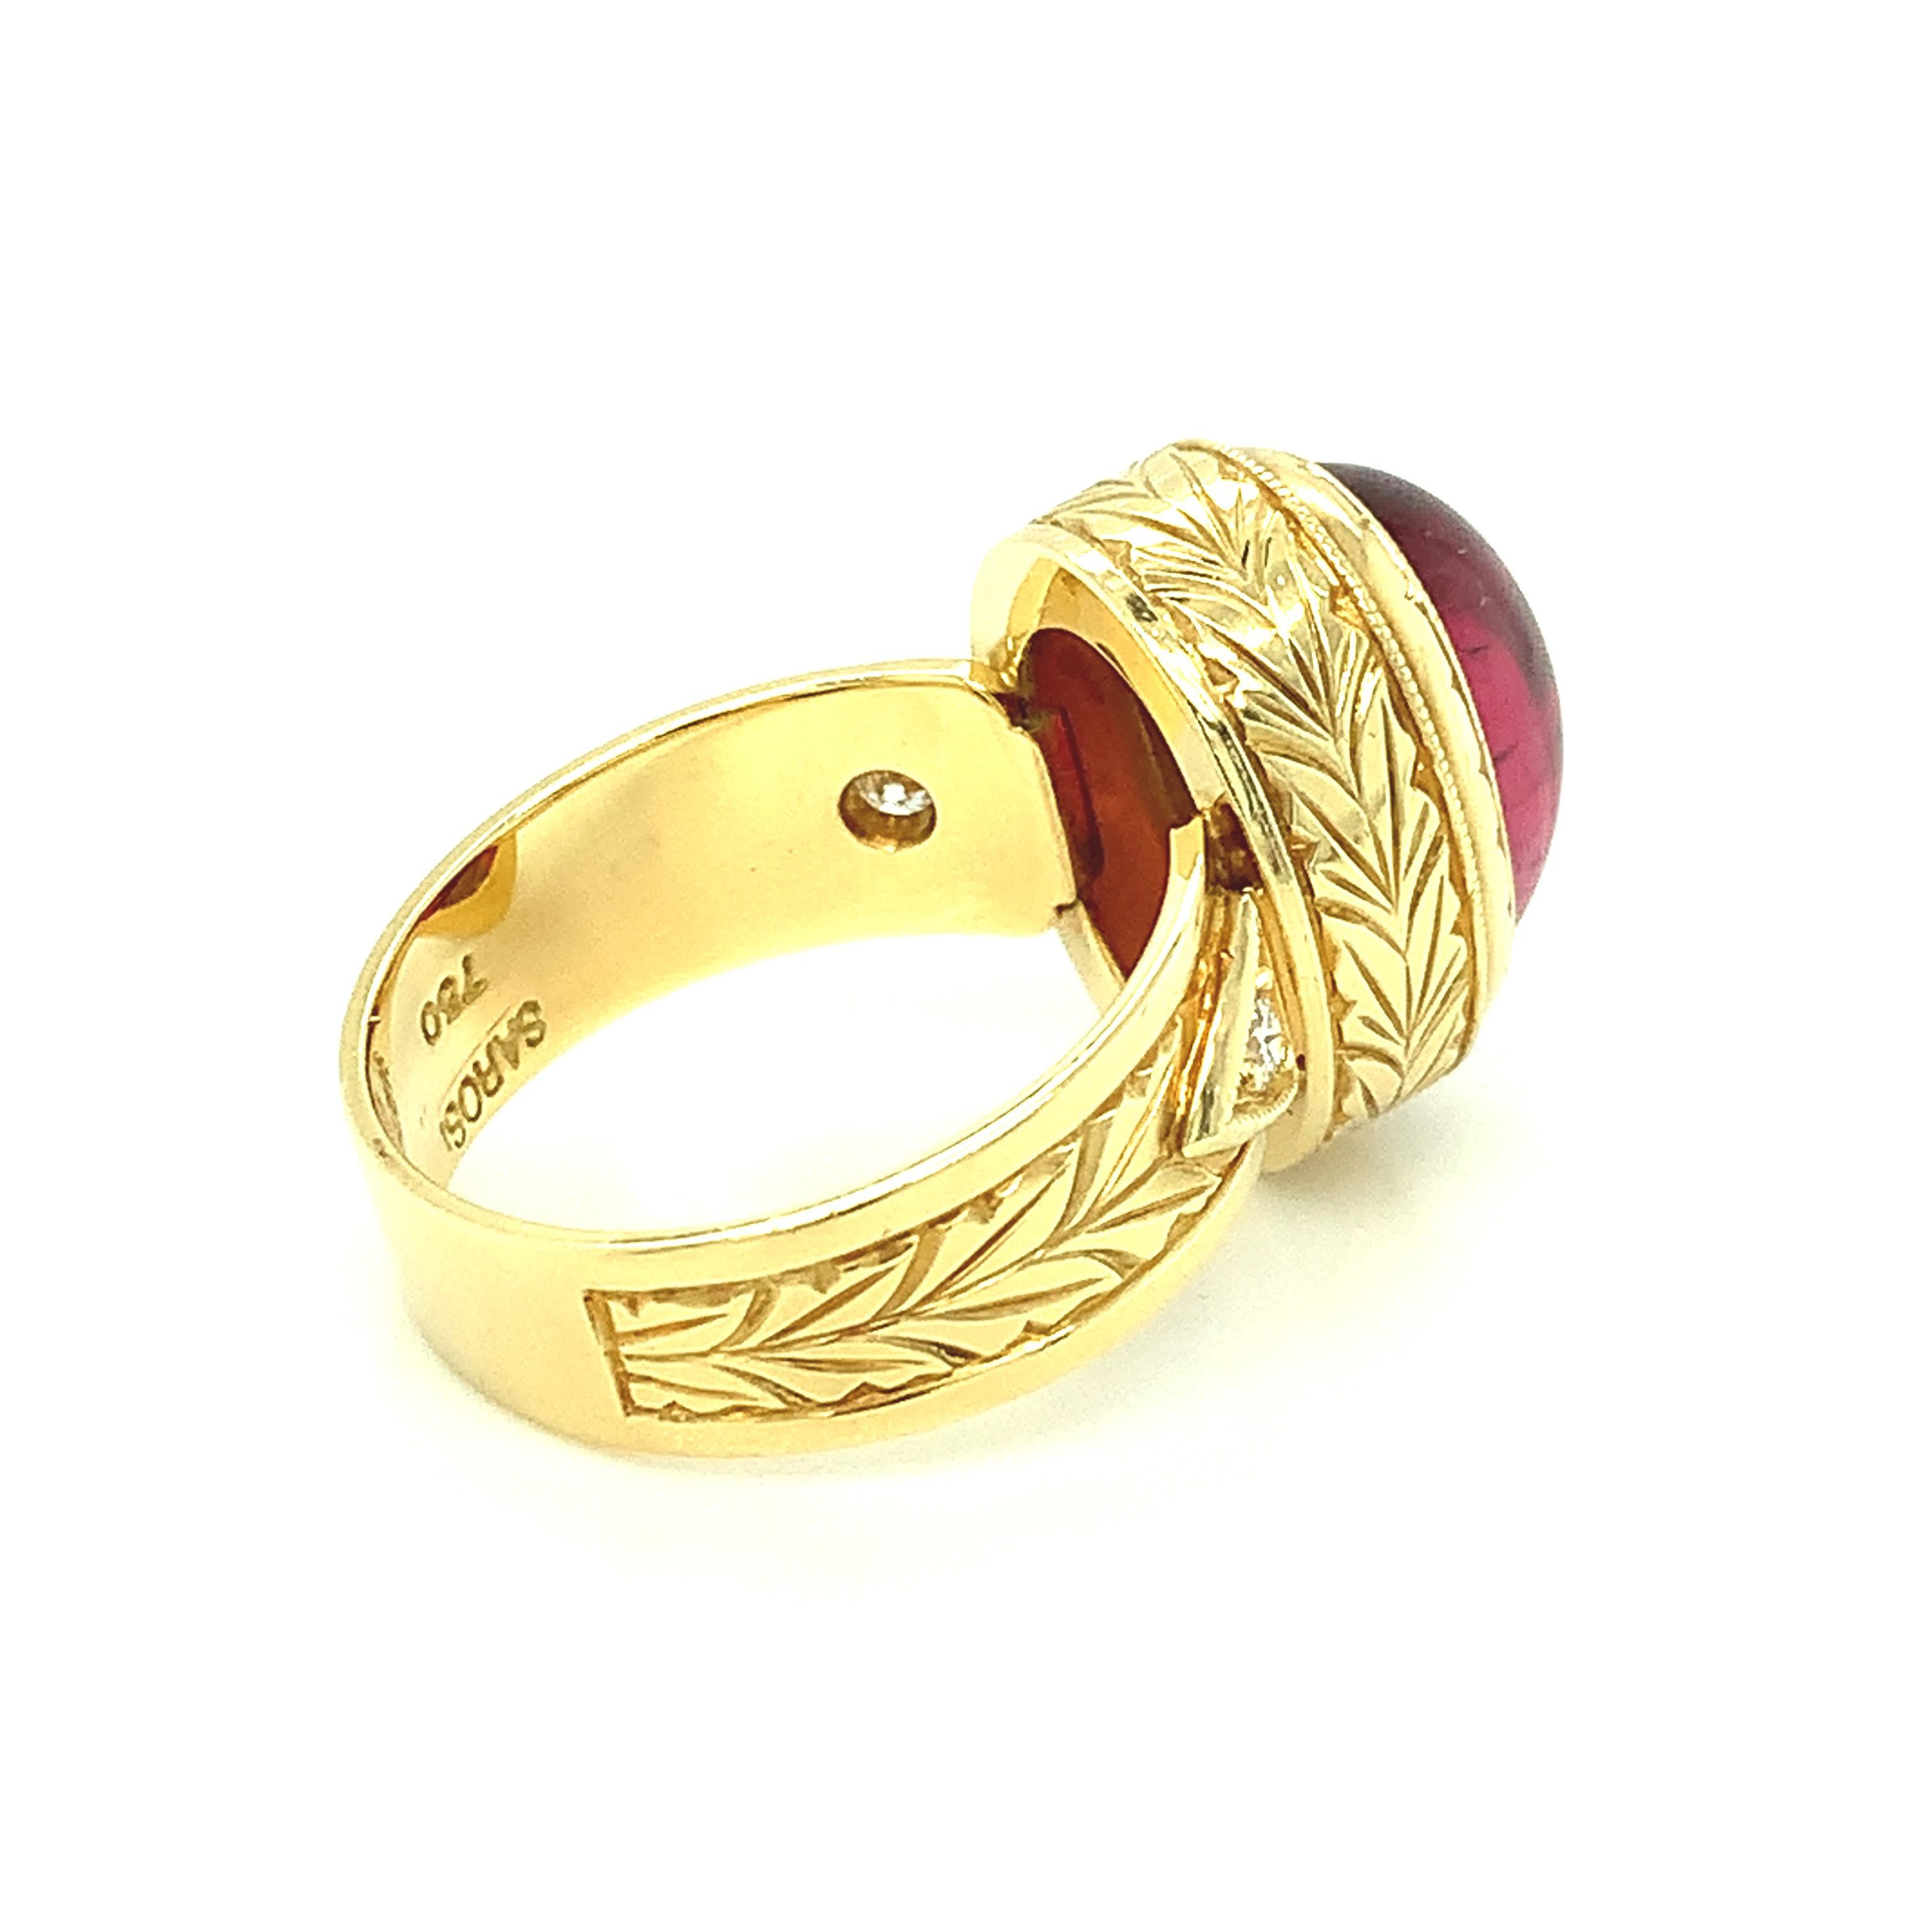 7.47 Carat Rubellite Tourmaline Cabochon and Diamond Band Ring in Yellow Gold For Sale 2